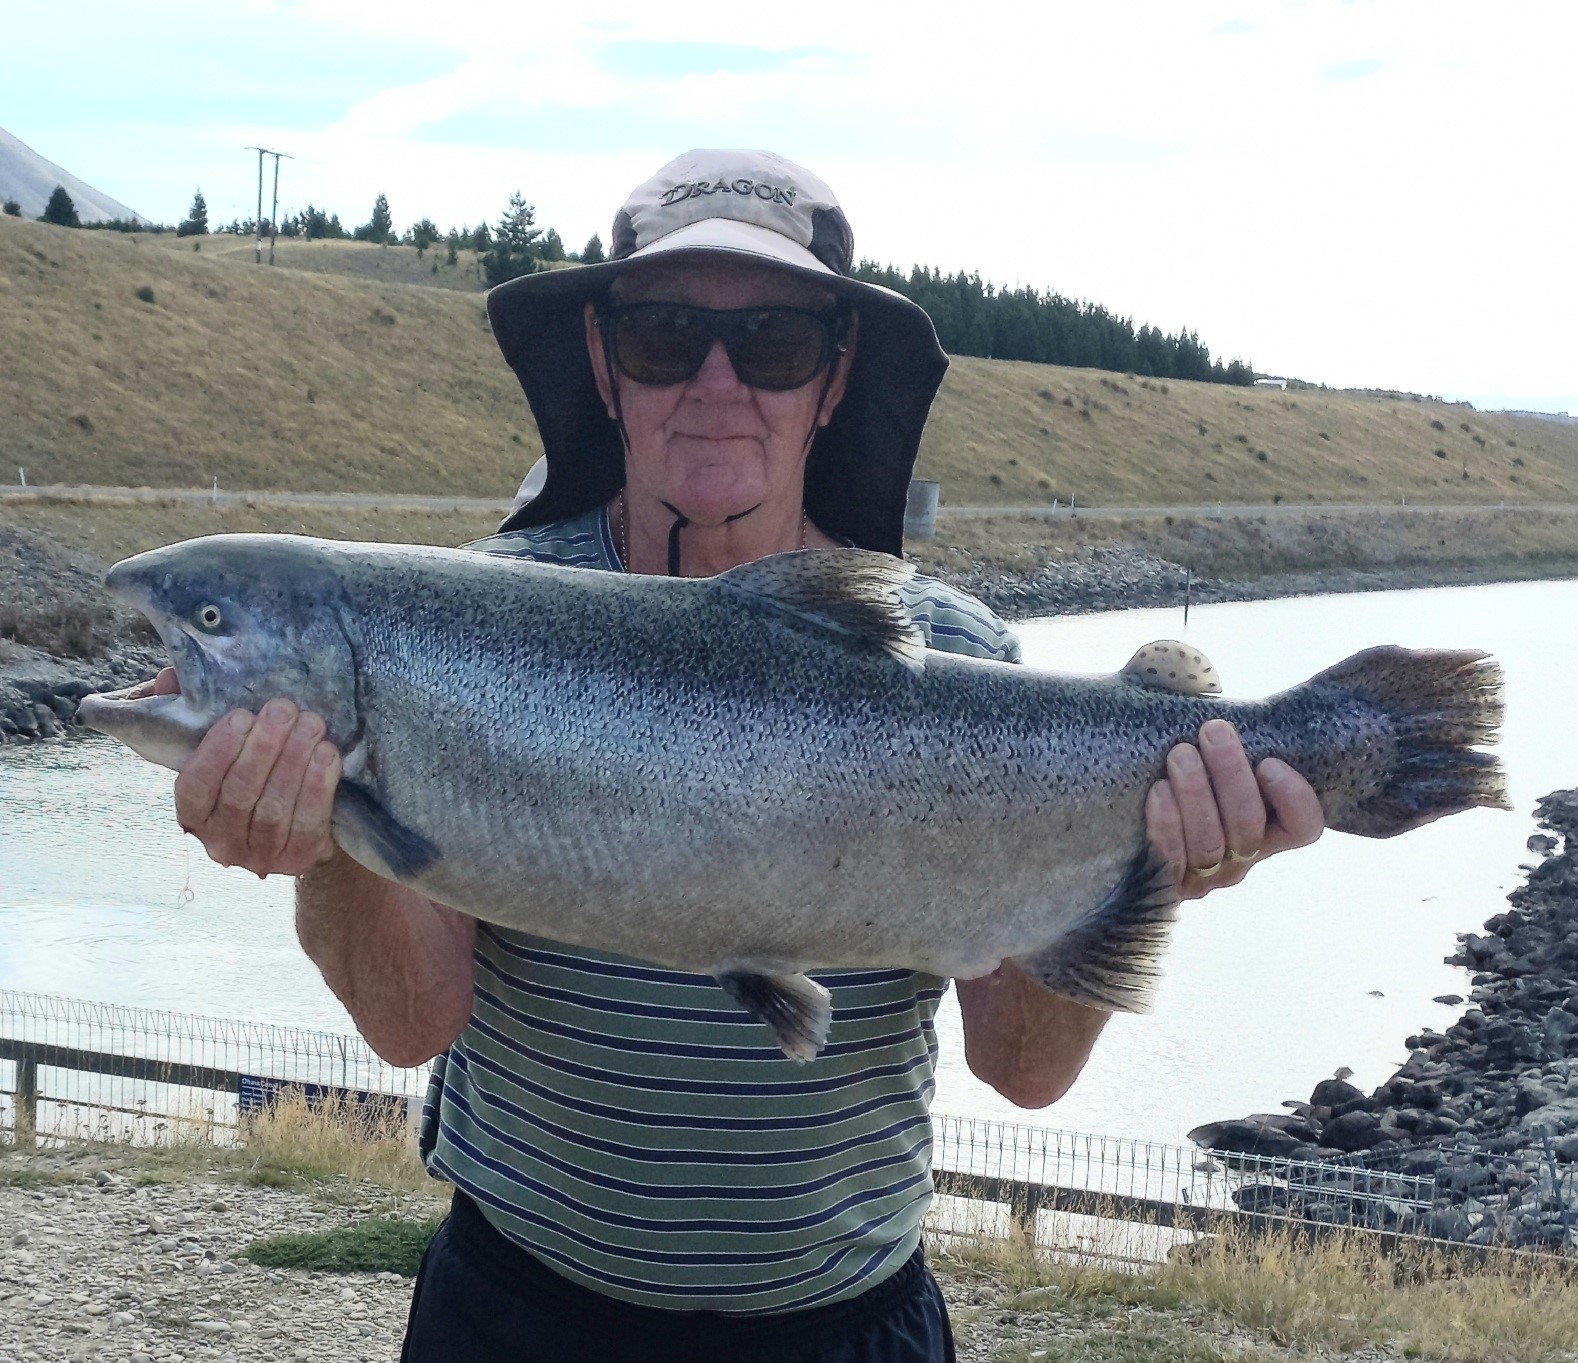 WFR2123.55 It has taken over 70 years but Keith Aitchison finally got his first salmon over 20 pounds good on ya Keith